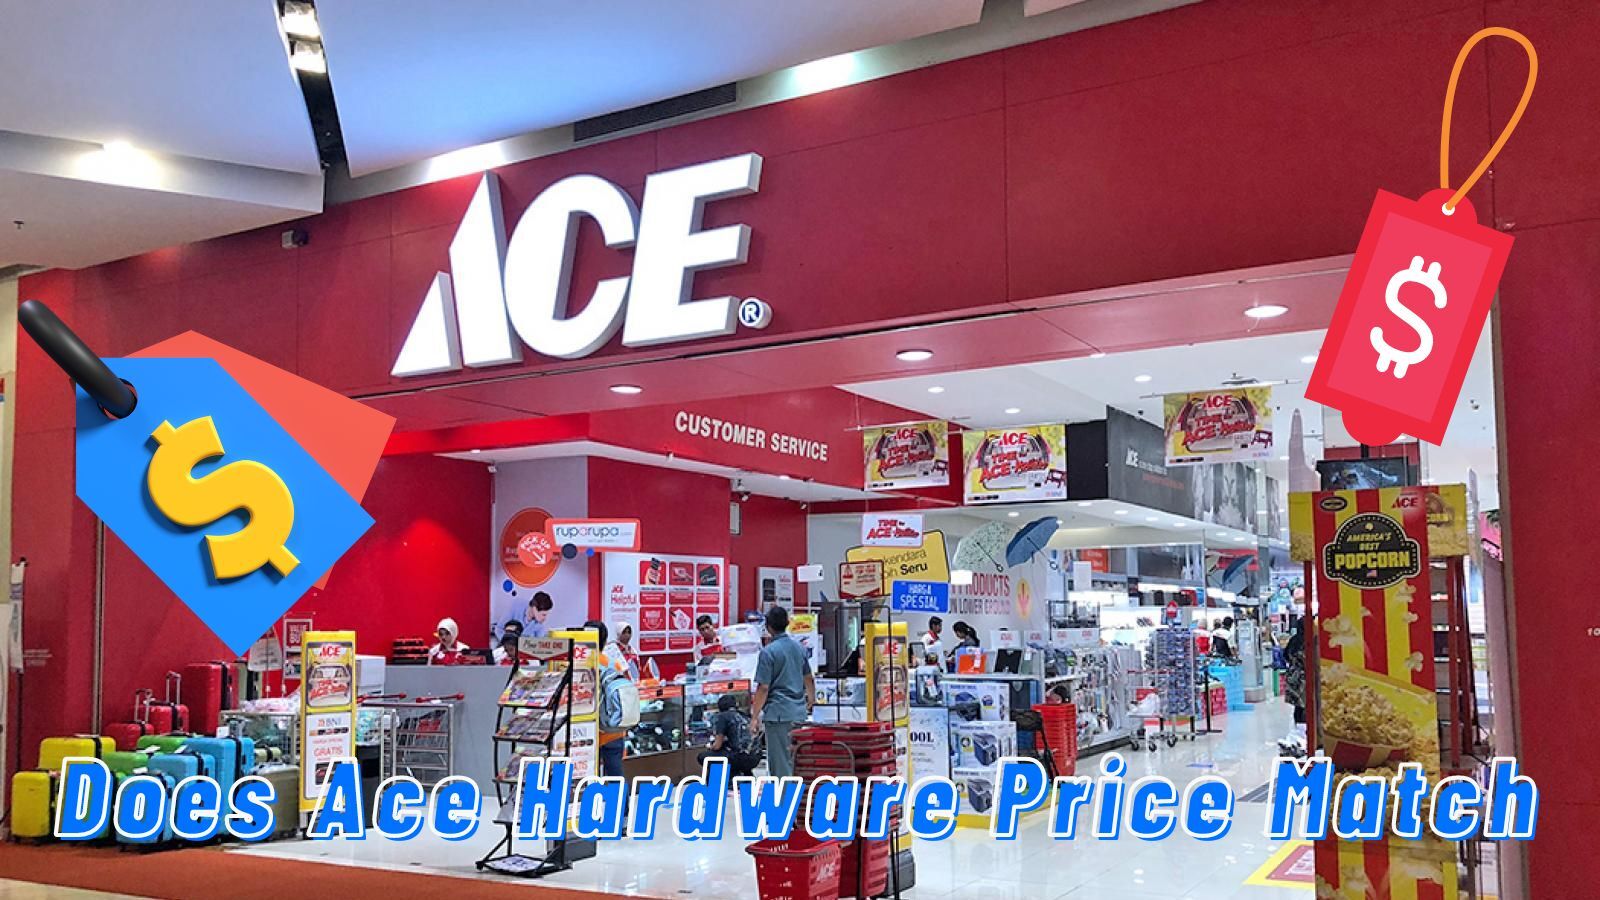 Does Ace Hardware Price Match? (All You Need to Know)